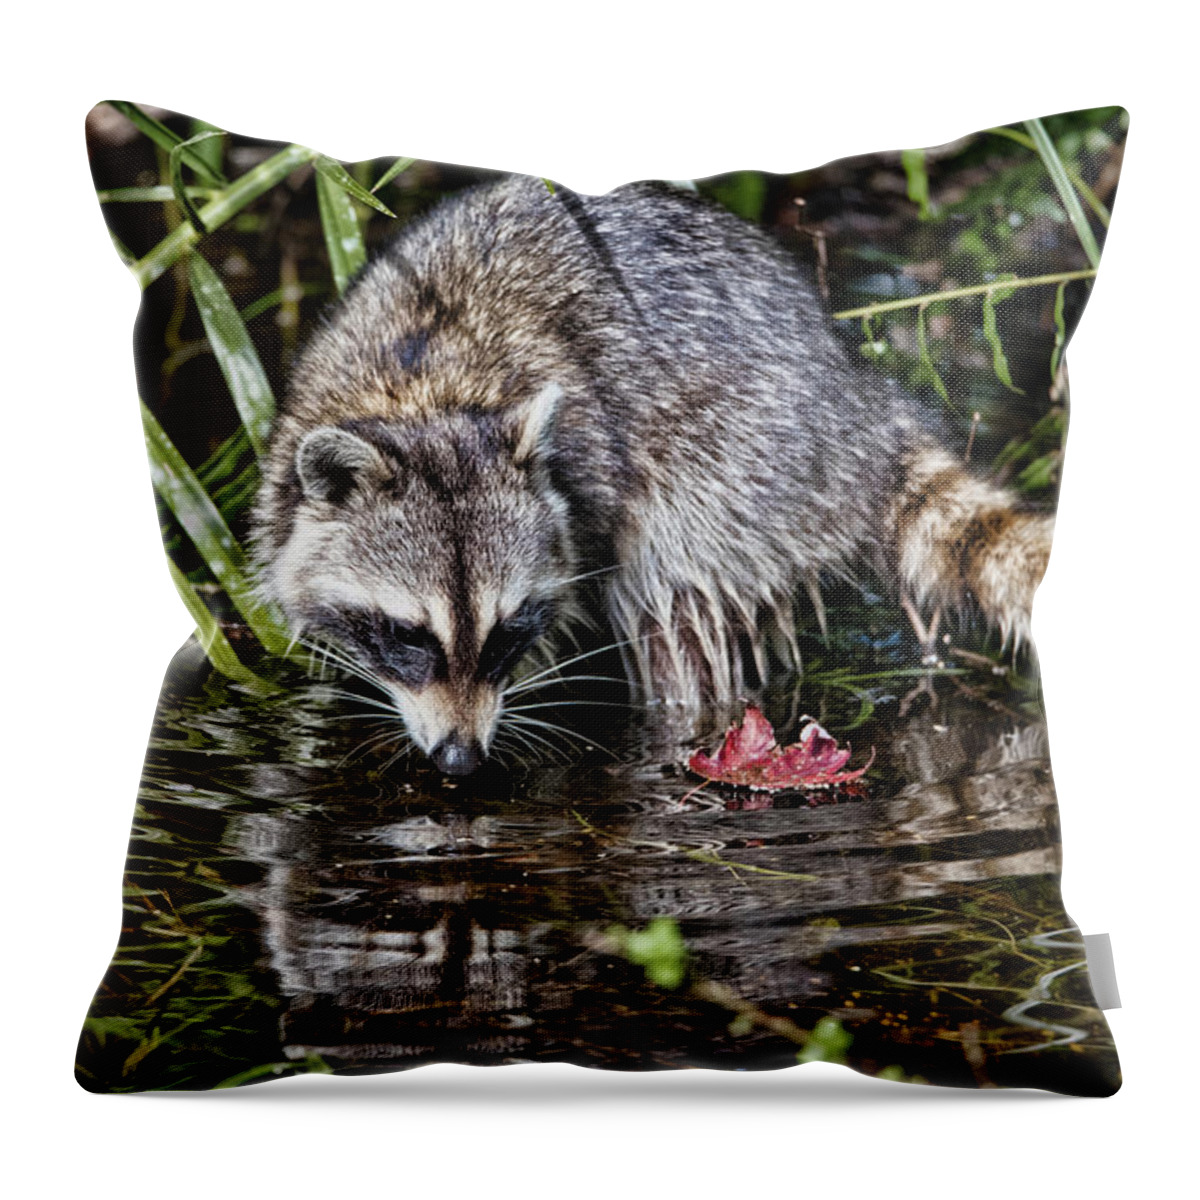 Raccoon Throw Pillow featuring the photograph Raccoon Feeding in Water Beside a Red Leaf by Artful Imagery